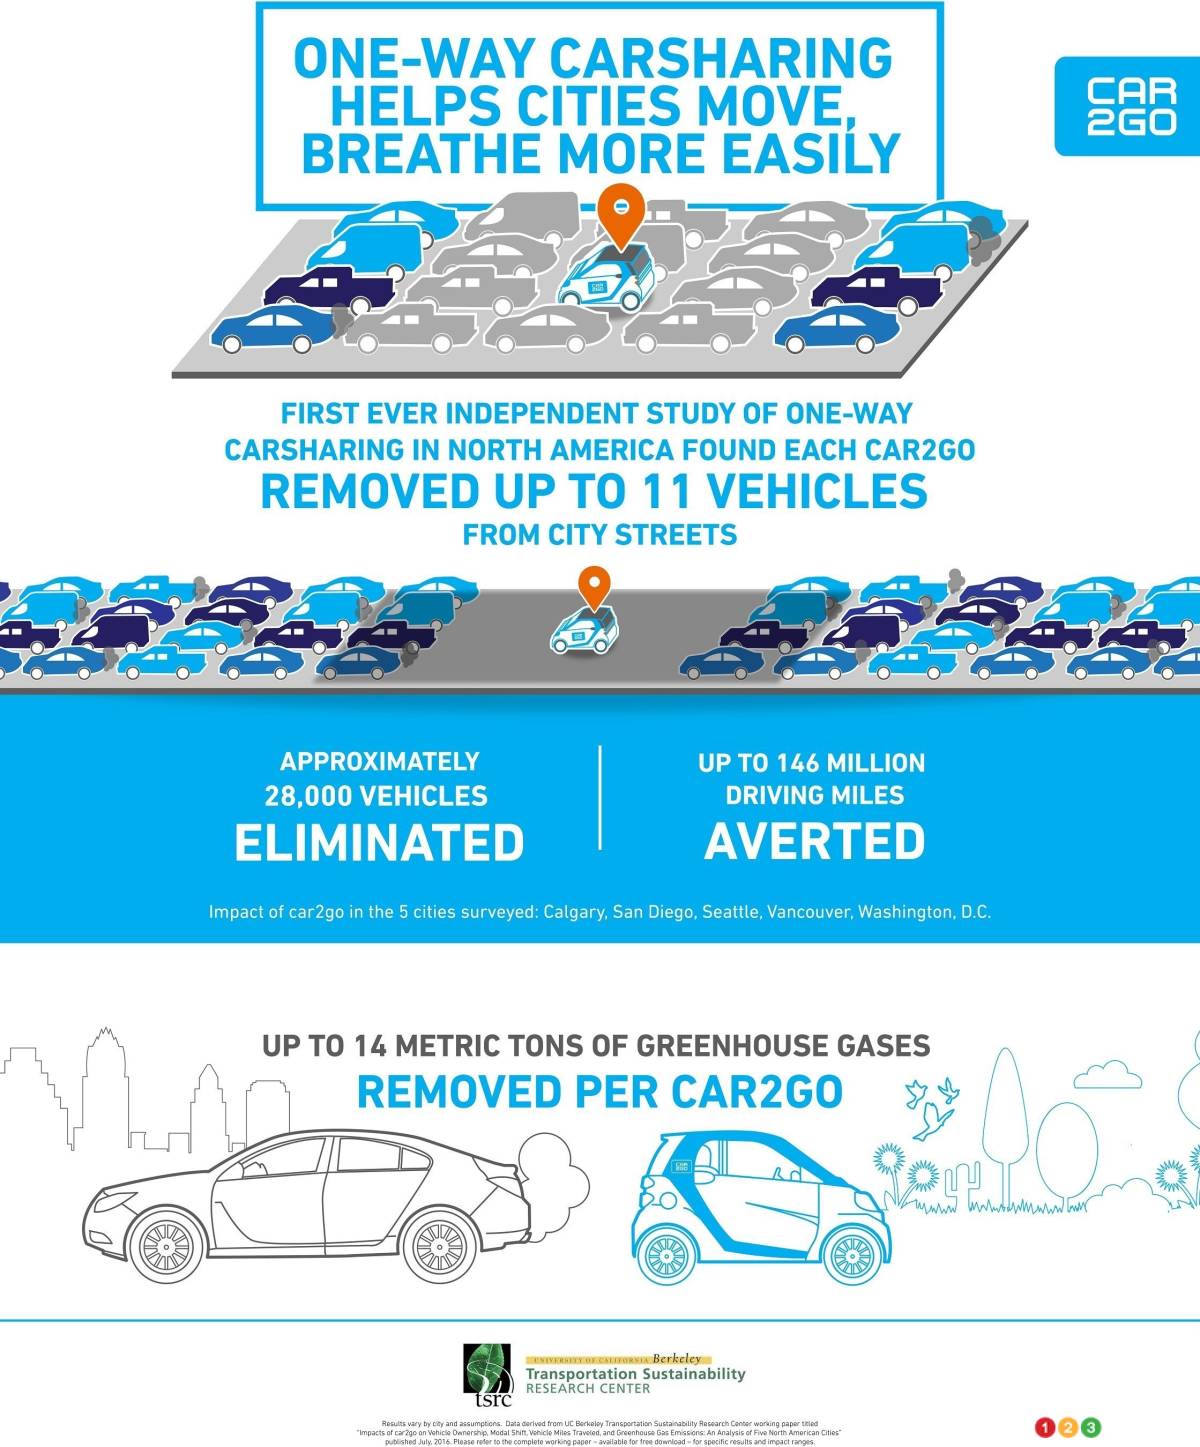 Carsharing services like car2go effectively reduce traffic congestion